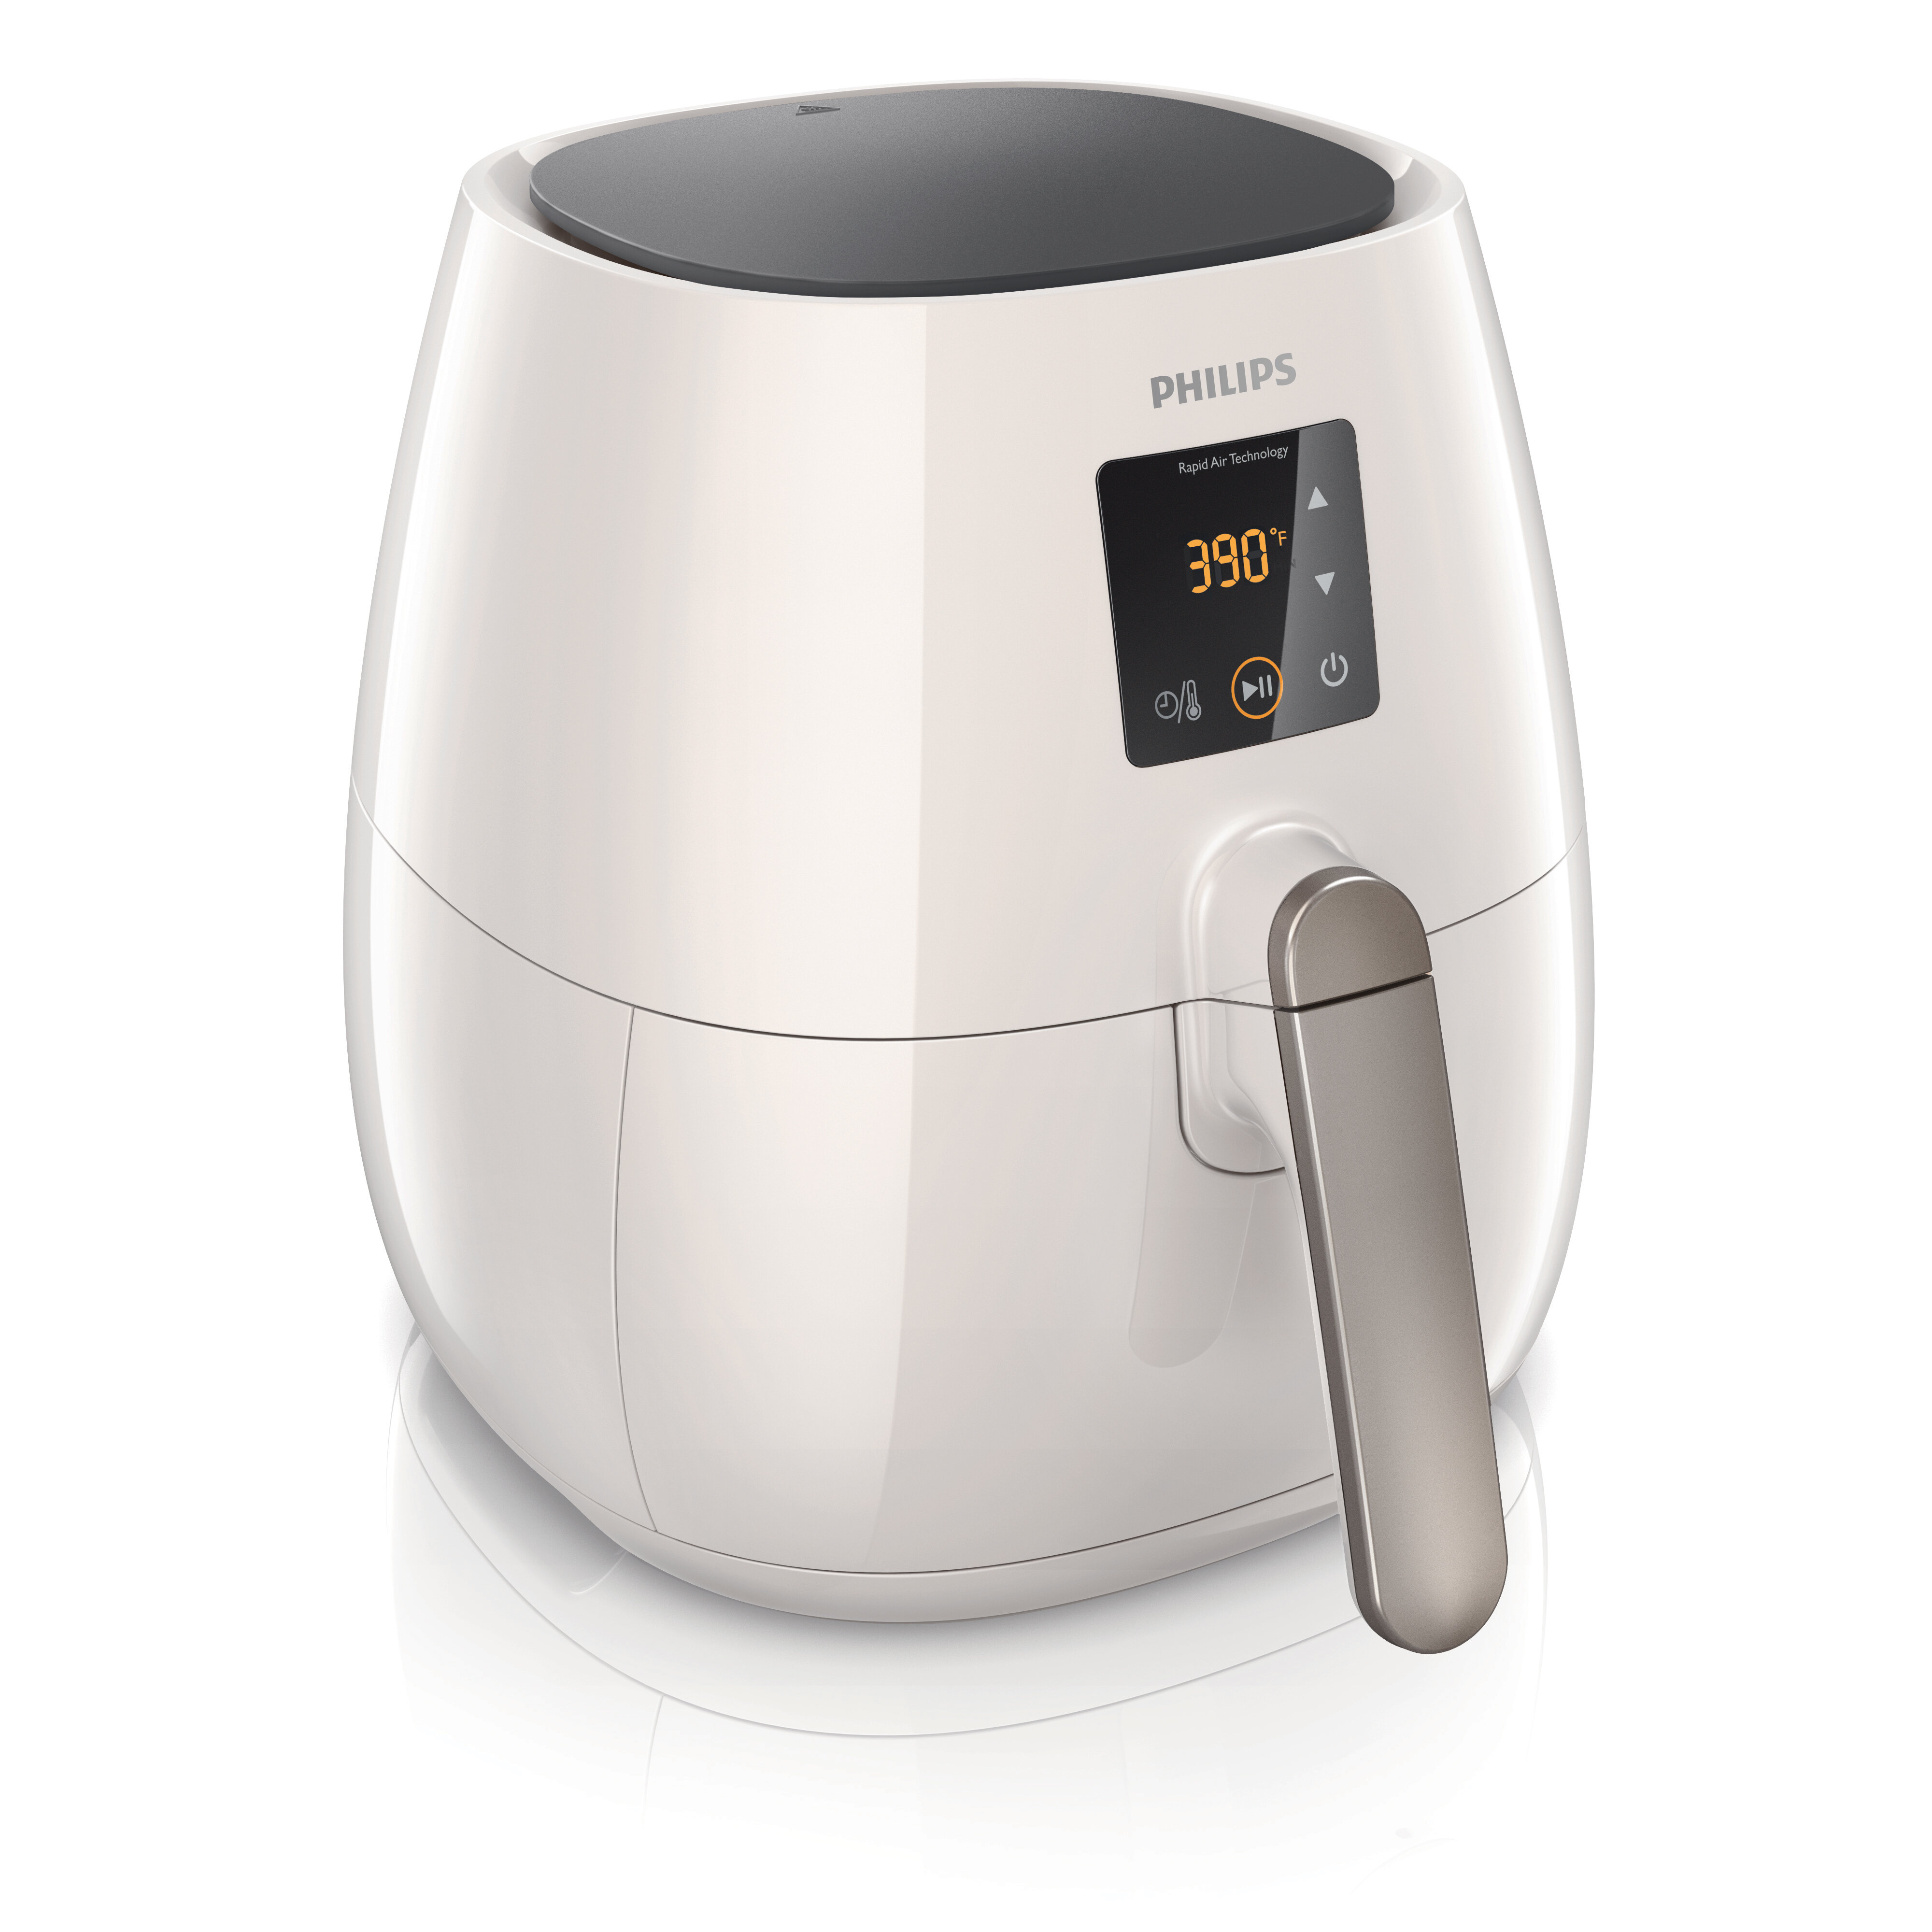 Fascinate Silicon airplane Philips Oil Less Fryer with Rapid Air Technology & Reviews | Wayfair